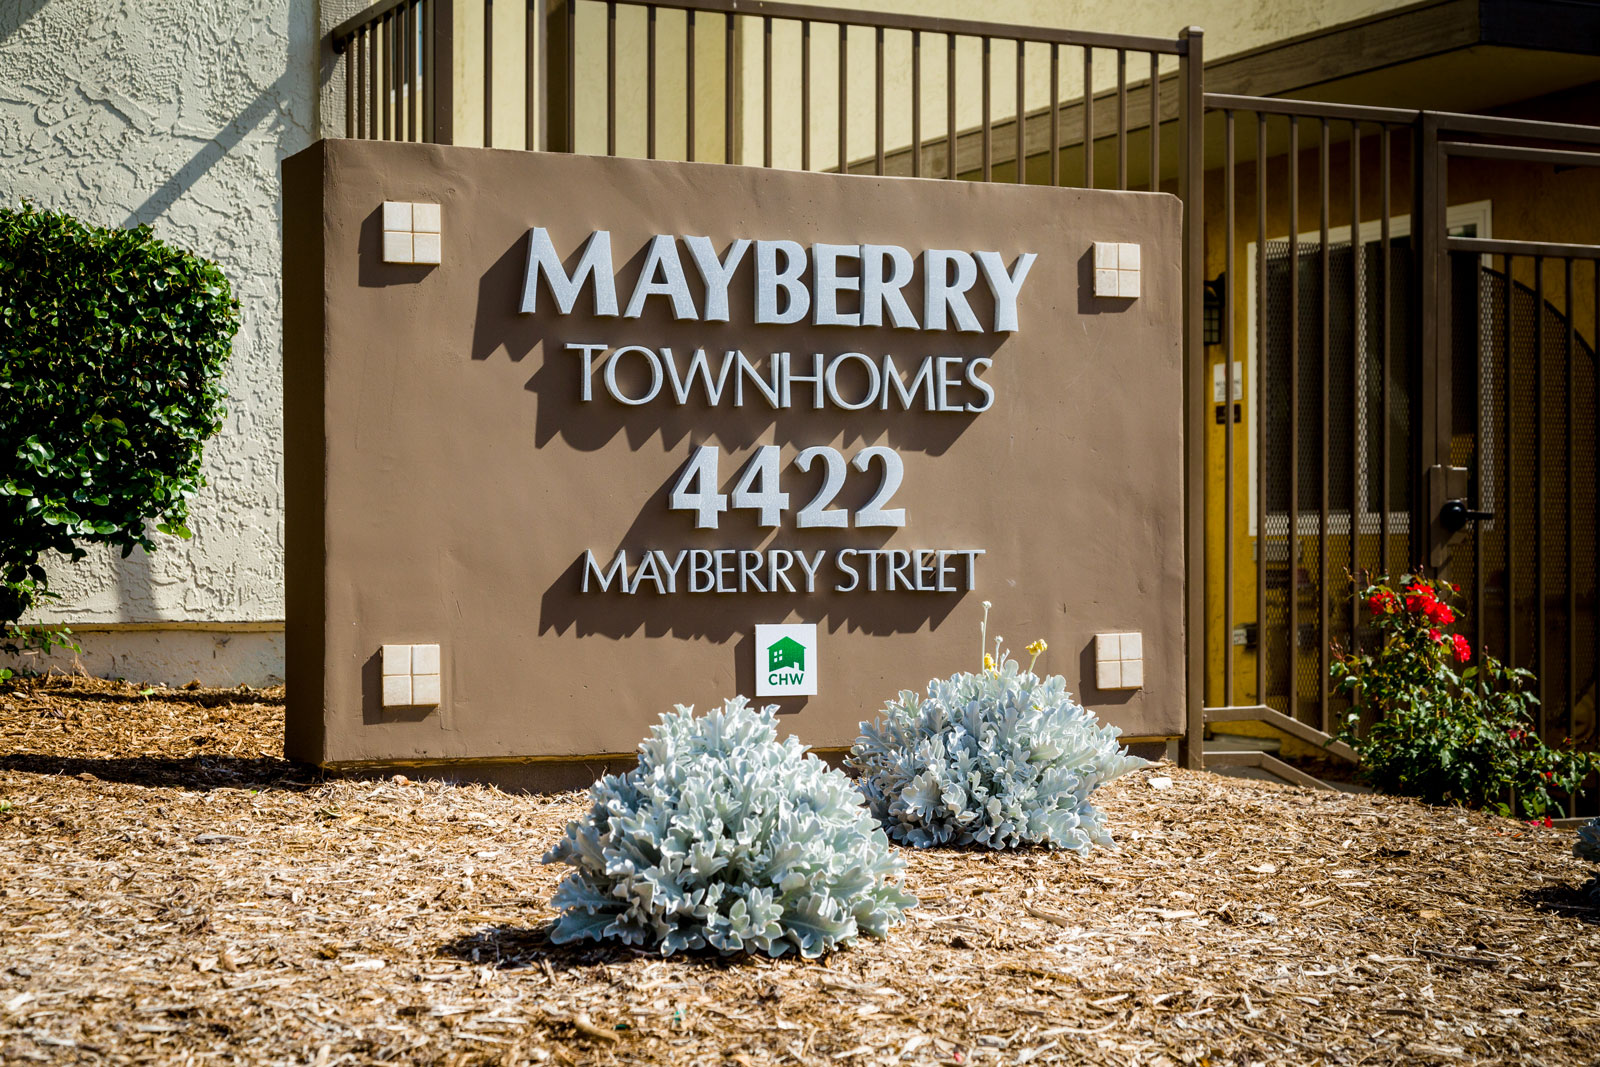 Mayberry Townhomes Public Housing